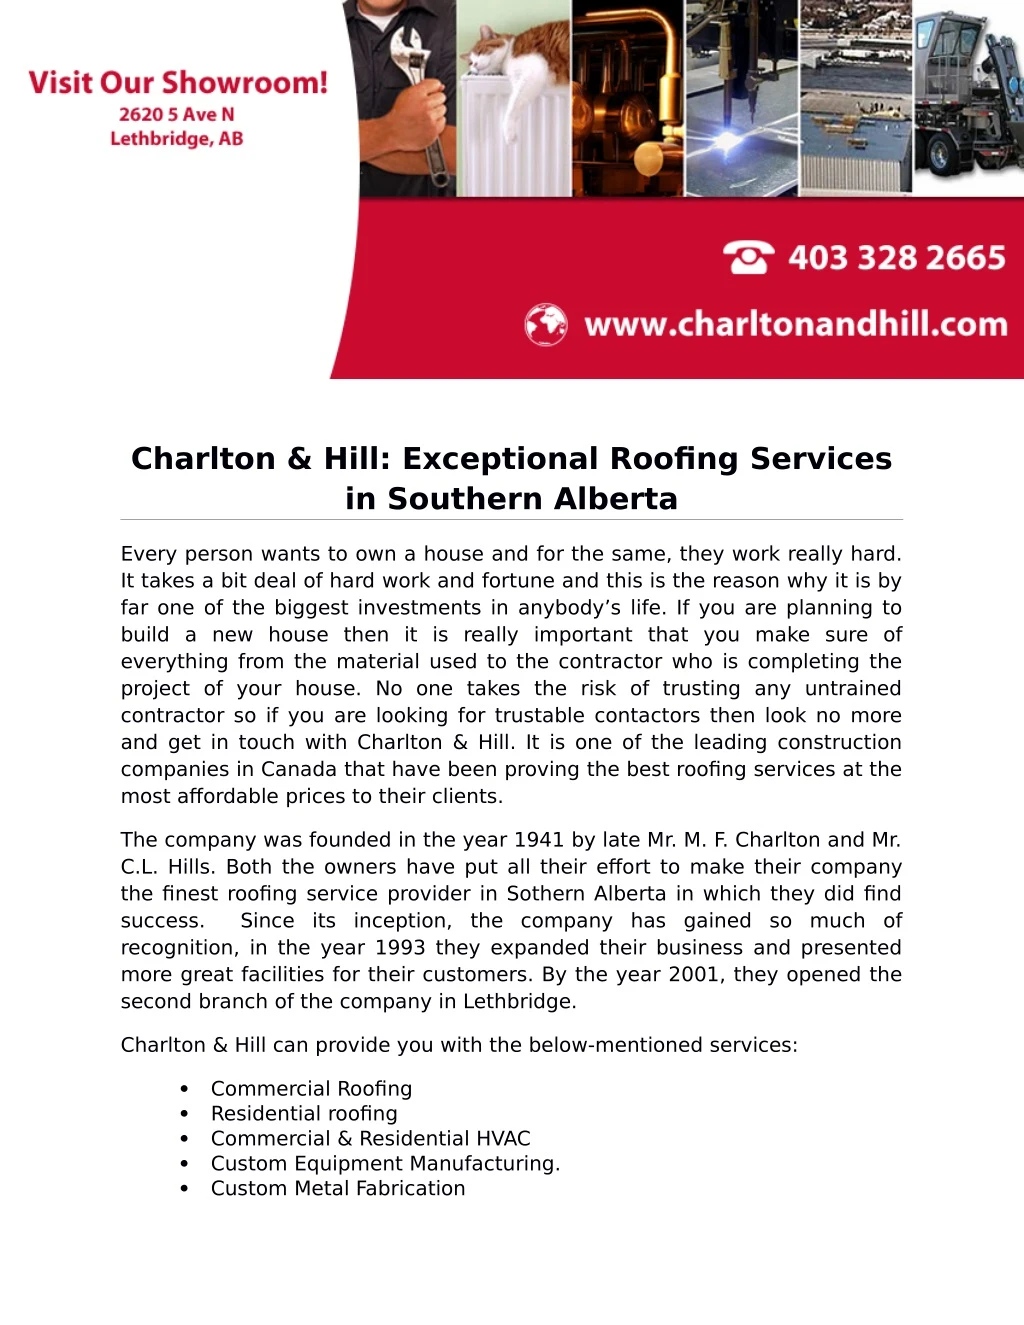 charlton hill exceptional roofing services